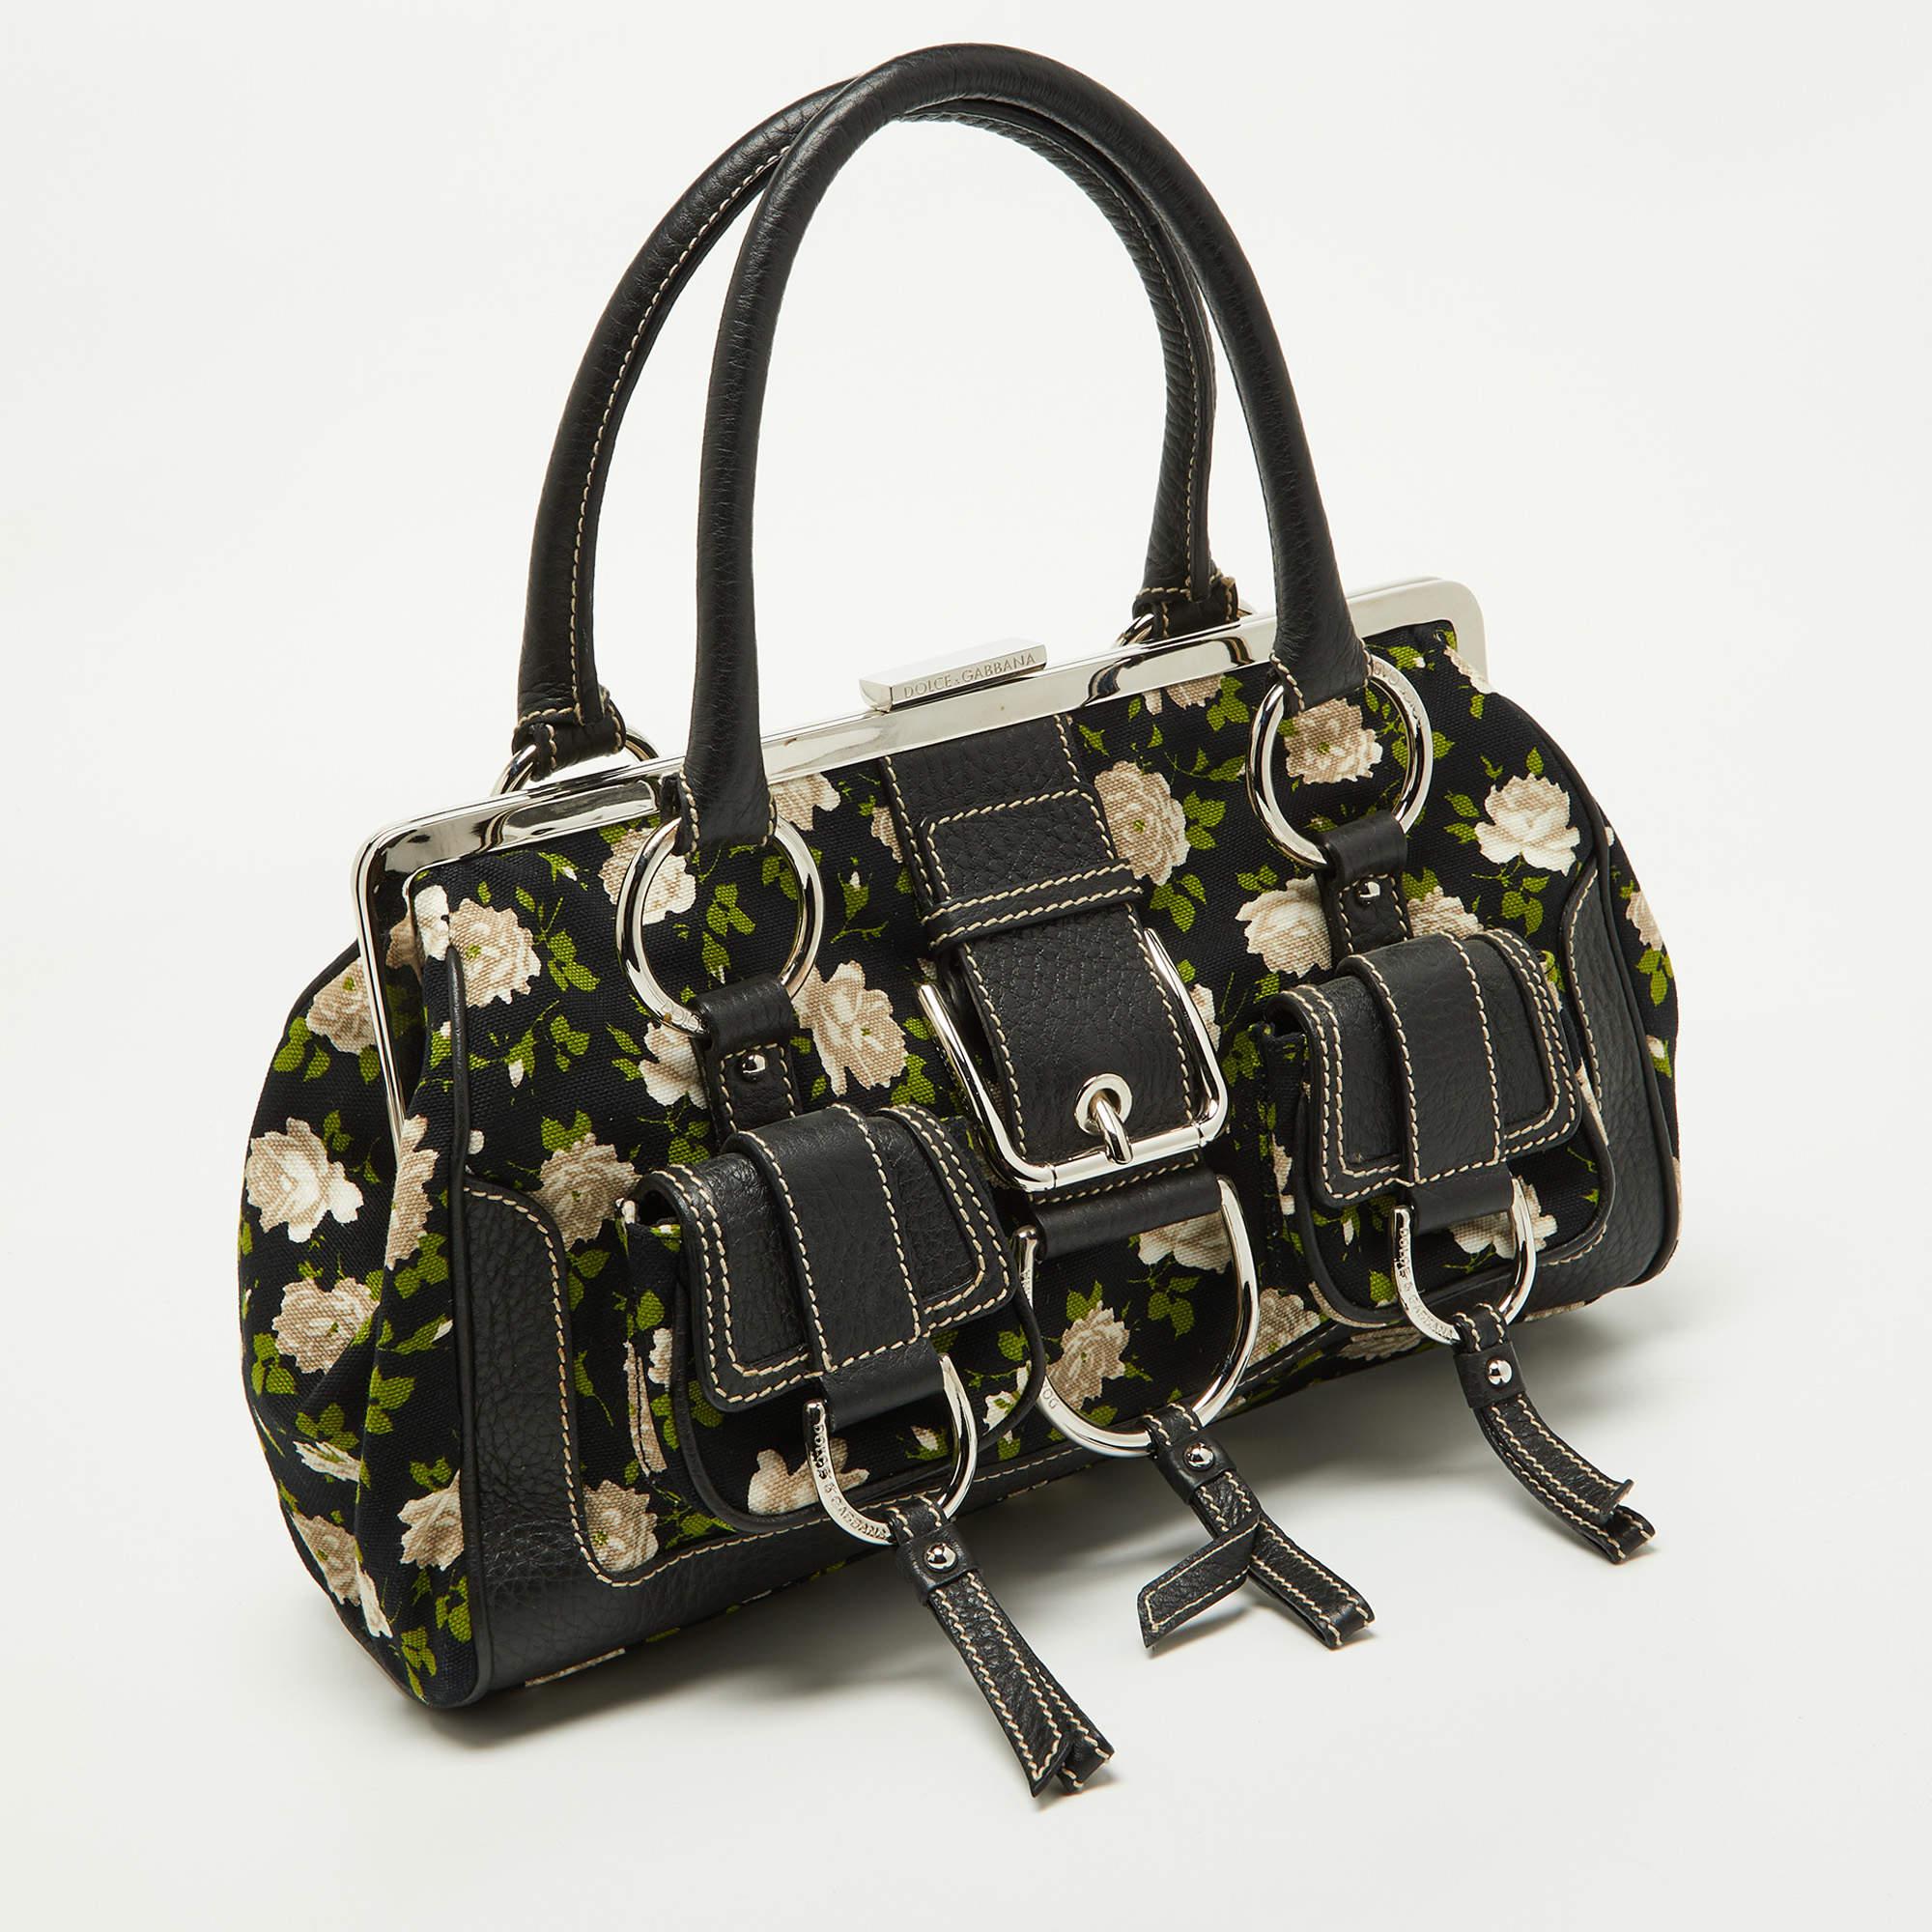 Dolce & Gabbana Black Floral Print Canvas and Leather Frame Satchel In Good Condition For Sale In Dubai, Al Qouz 2